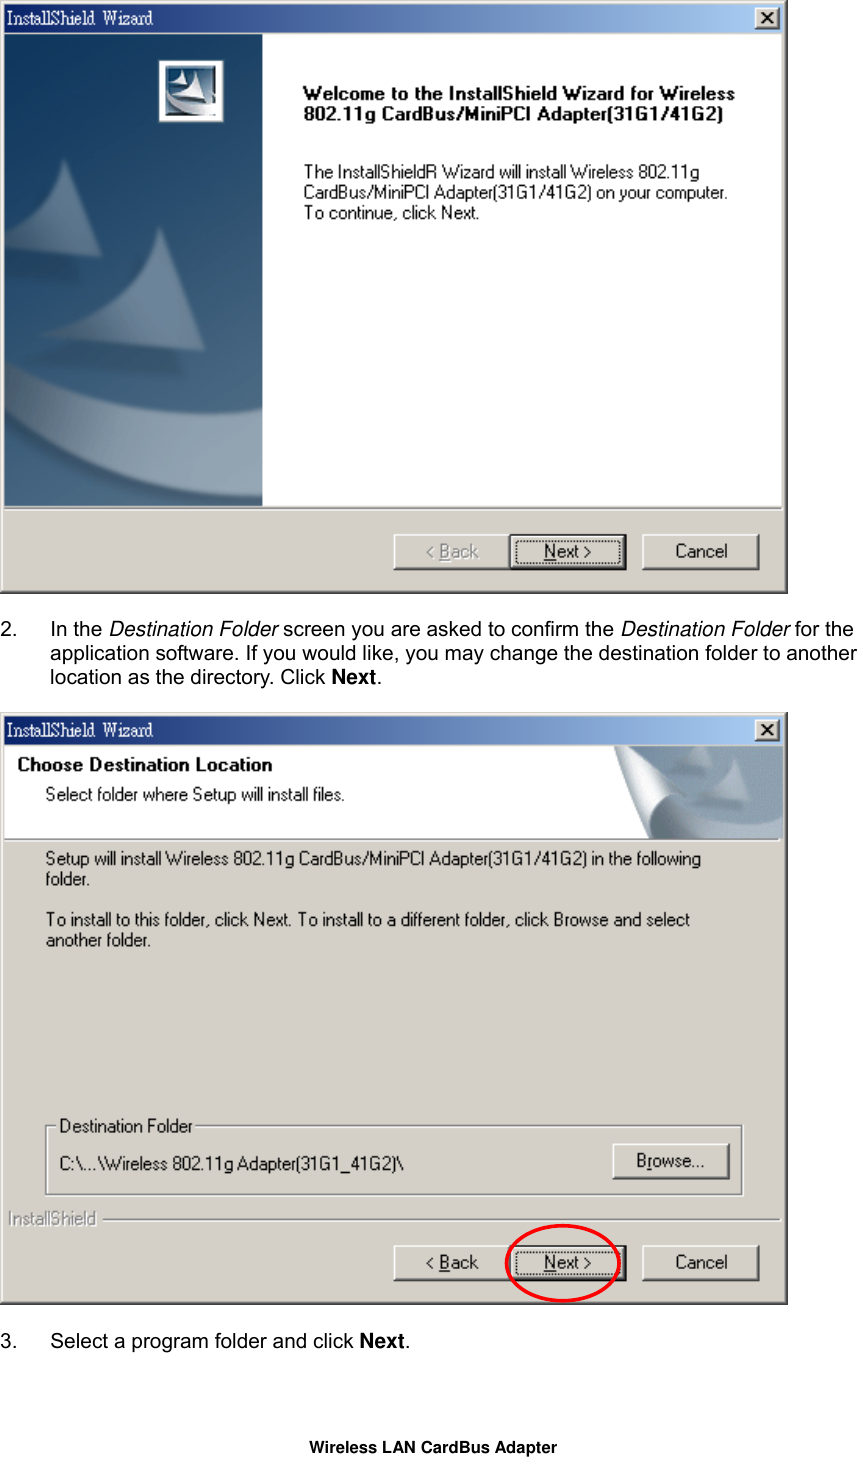   2. In the Destination Folder screen you are asked to confirm the Destination Folder for the application software. If you would like, you may change the destination folder to another location as the directory. Click Next.     3.  Select a program folder and click Next. Wireless LAN CardBus Adapter 